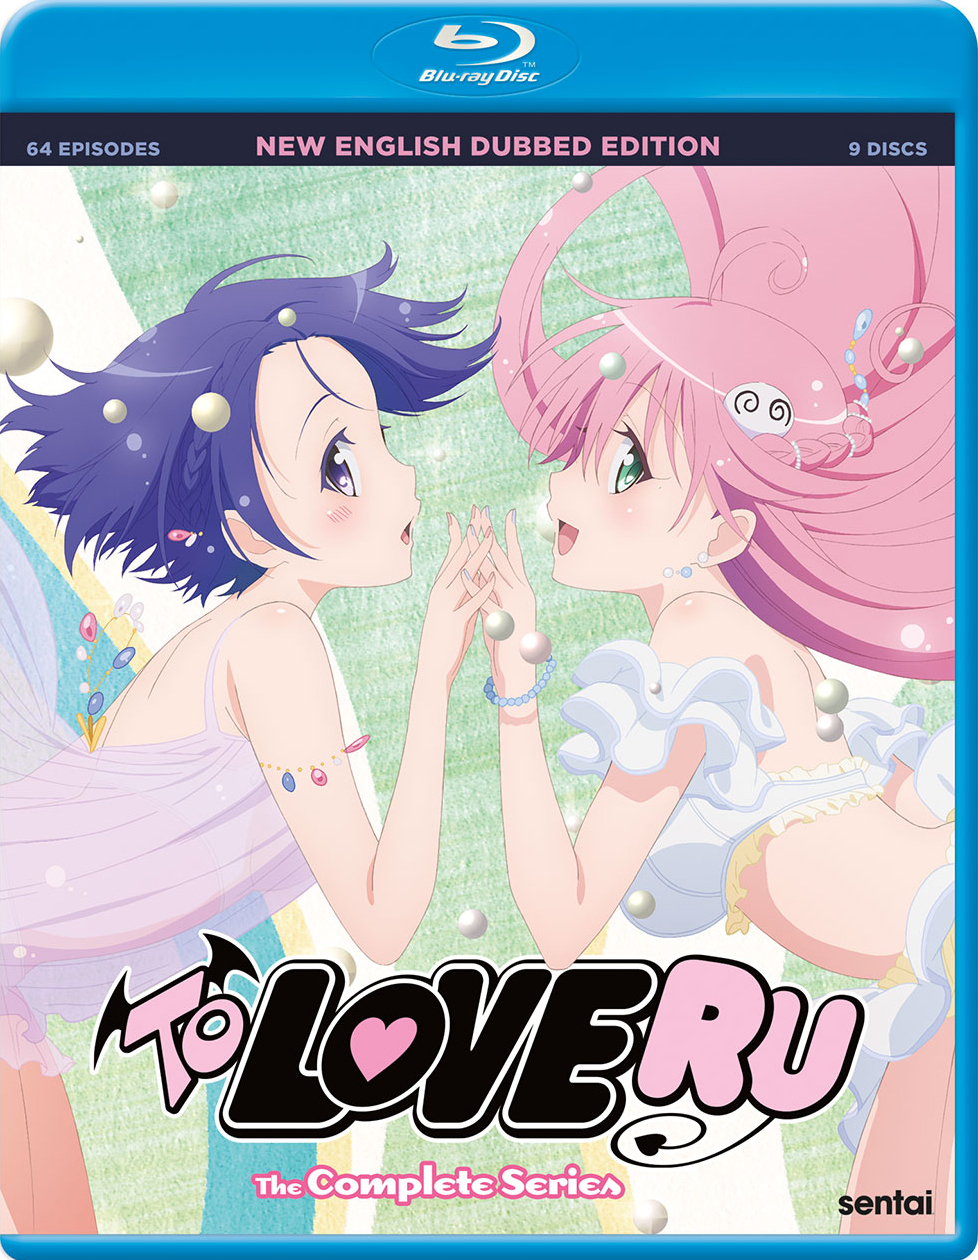 New on Blu-ray: MOTTO TO LOVE-RU Season 2 Complete Collection